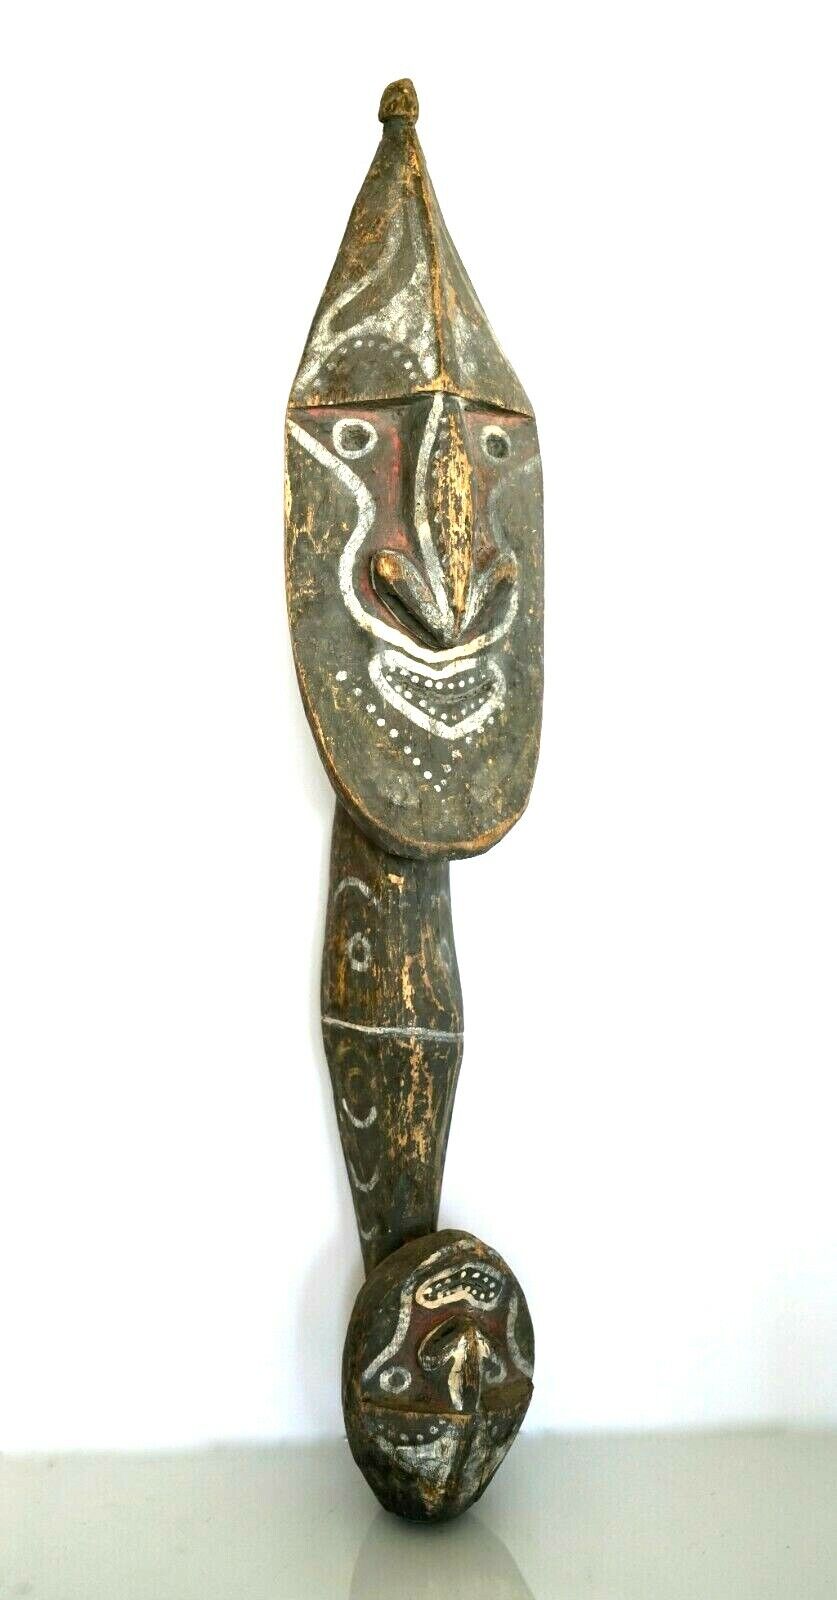 Antique African Tribal Carved Wood Mask Sculpture Two Headed Creature 30